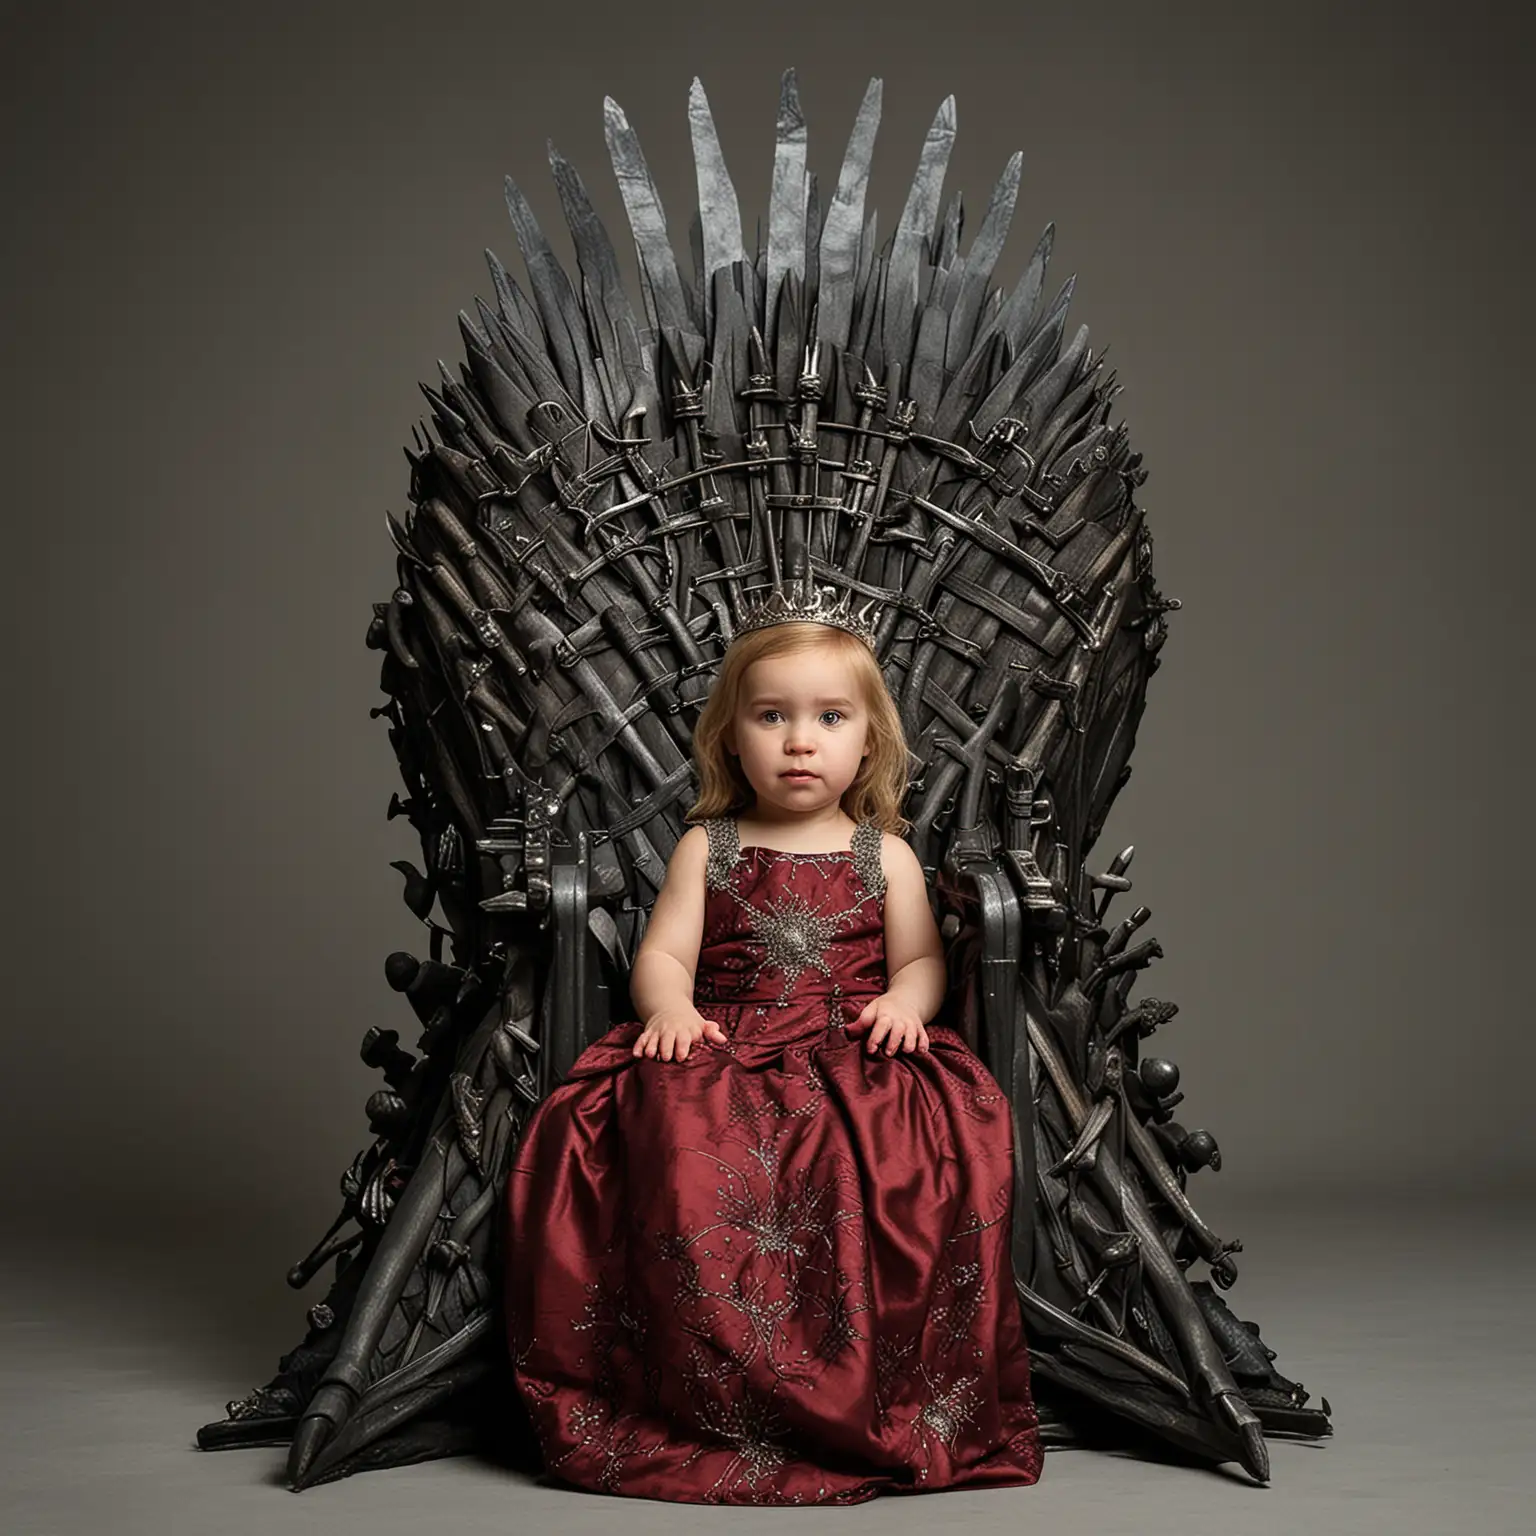 Young Girl on Iron Throne in Game of Thrones Costume